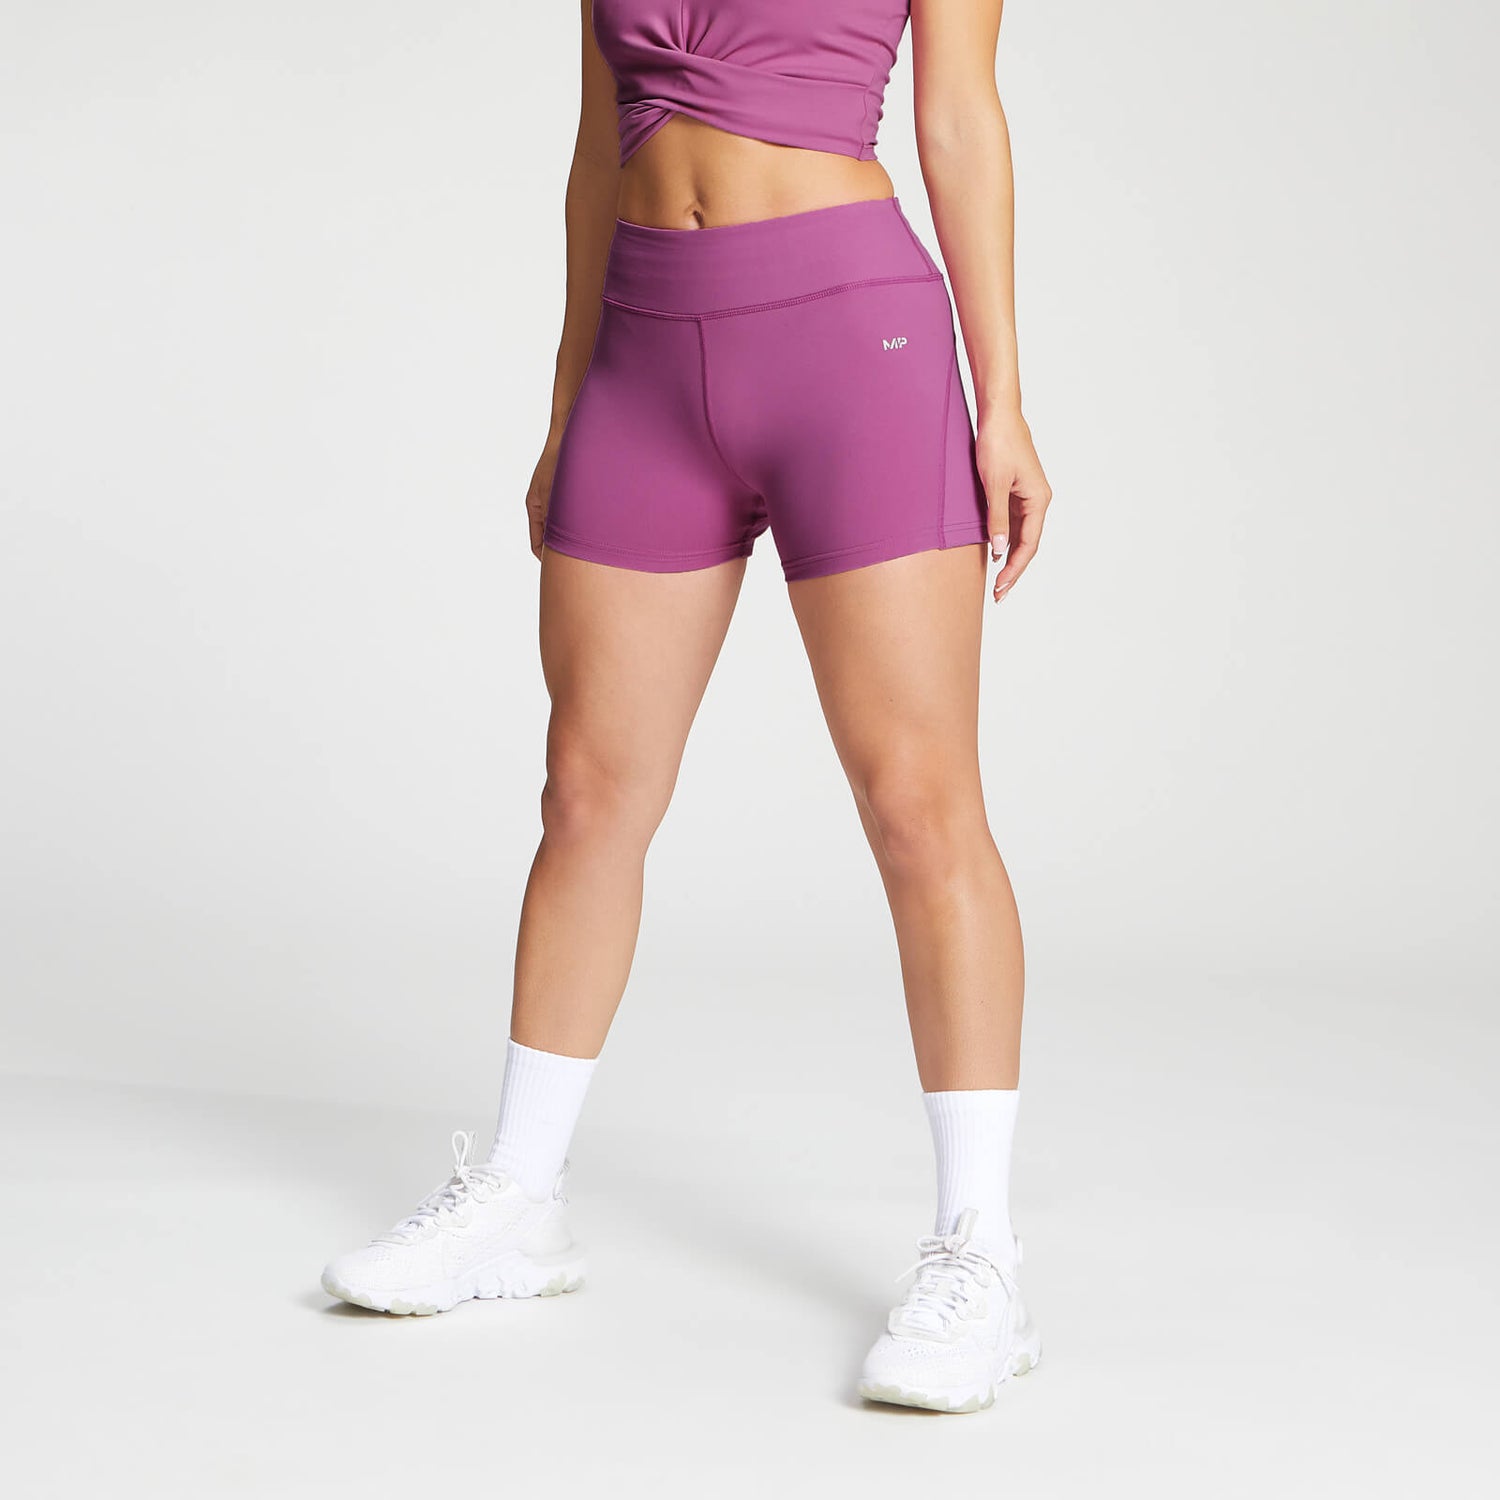 MP Women's Power Booty Shorts - Orchid - M